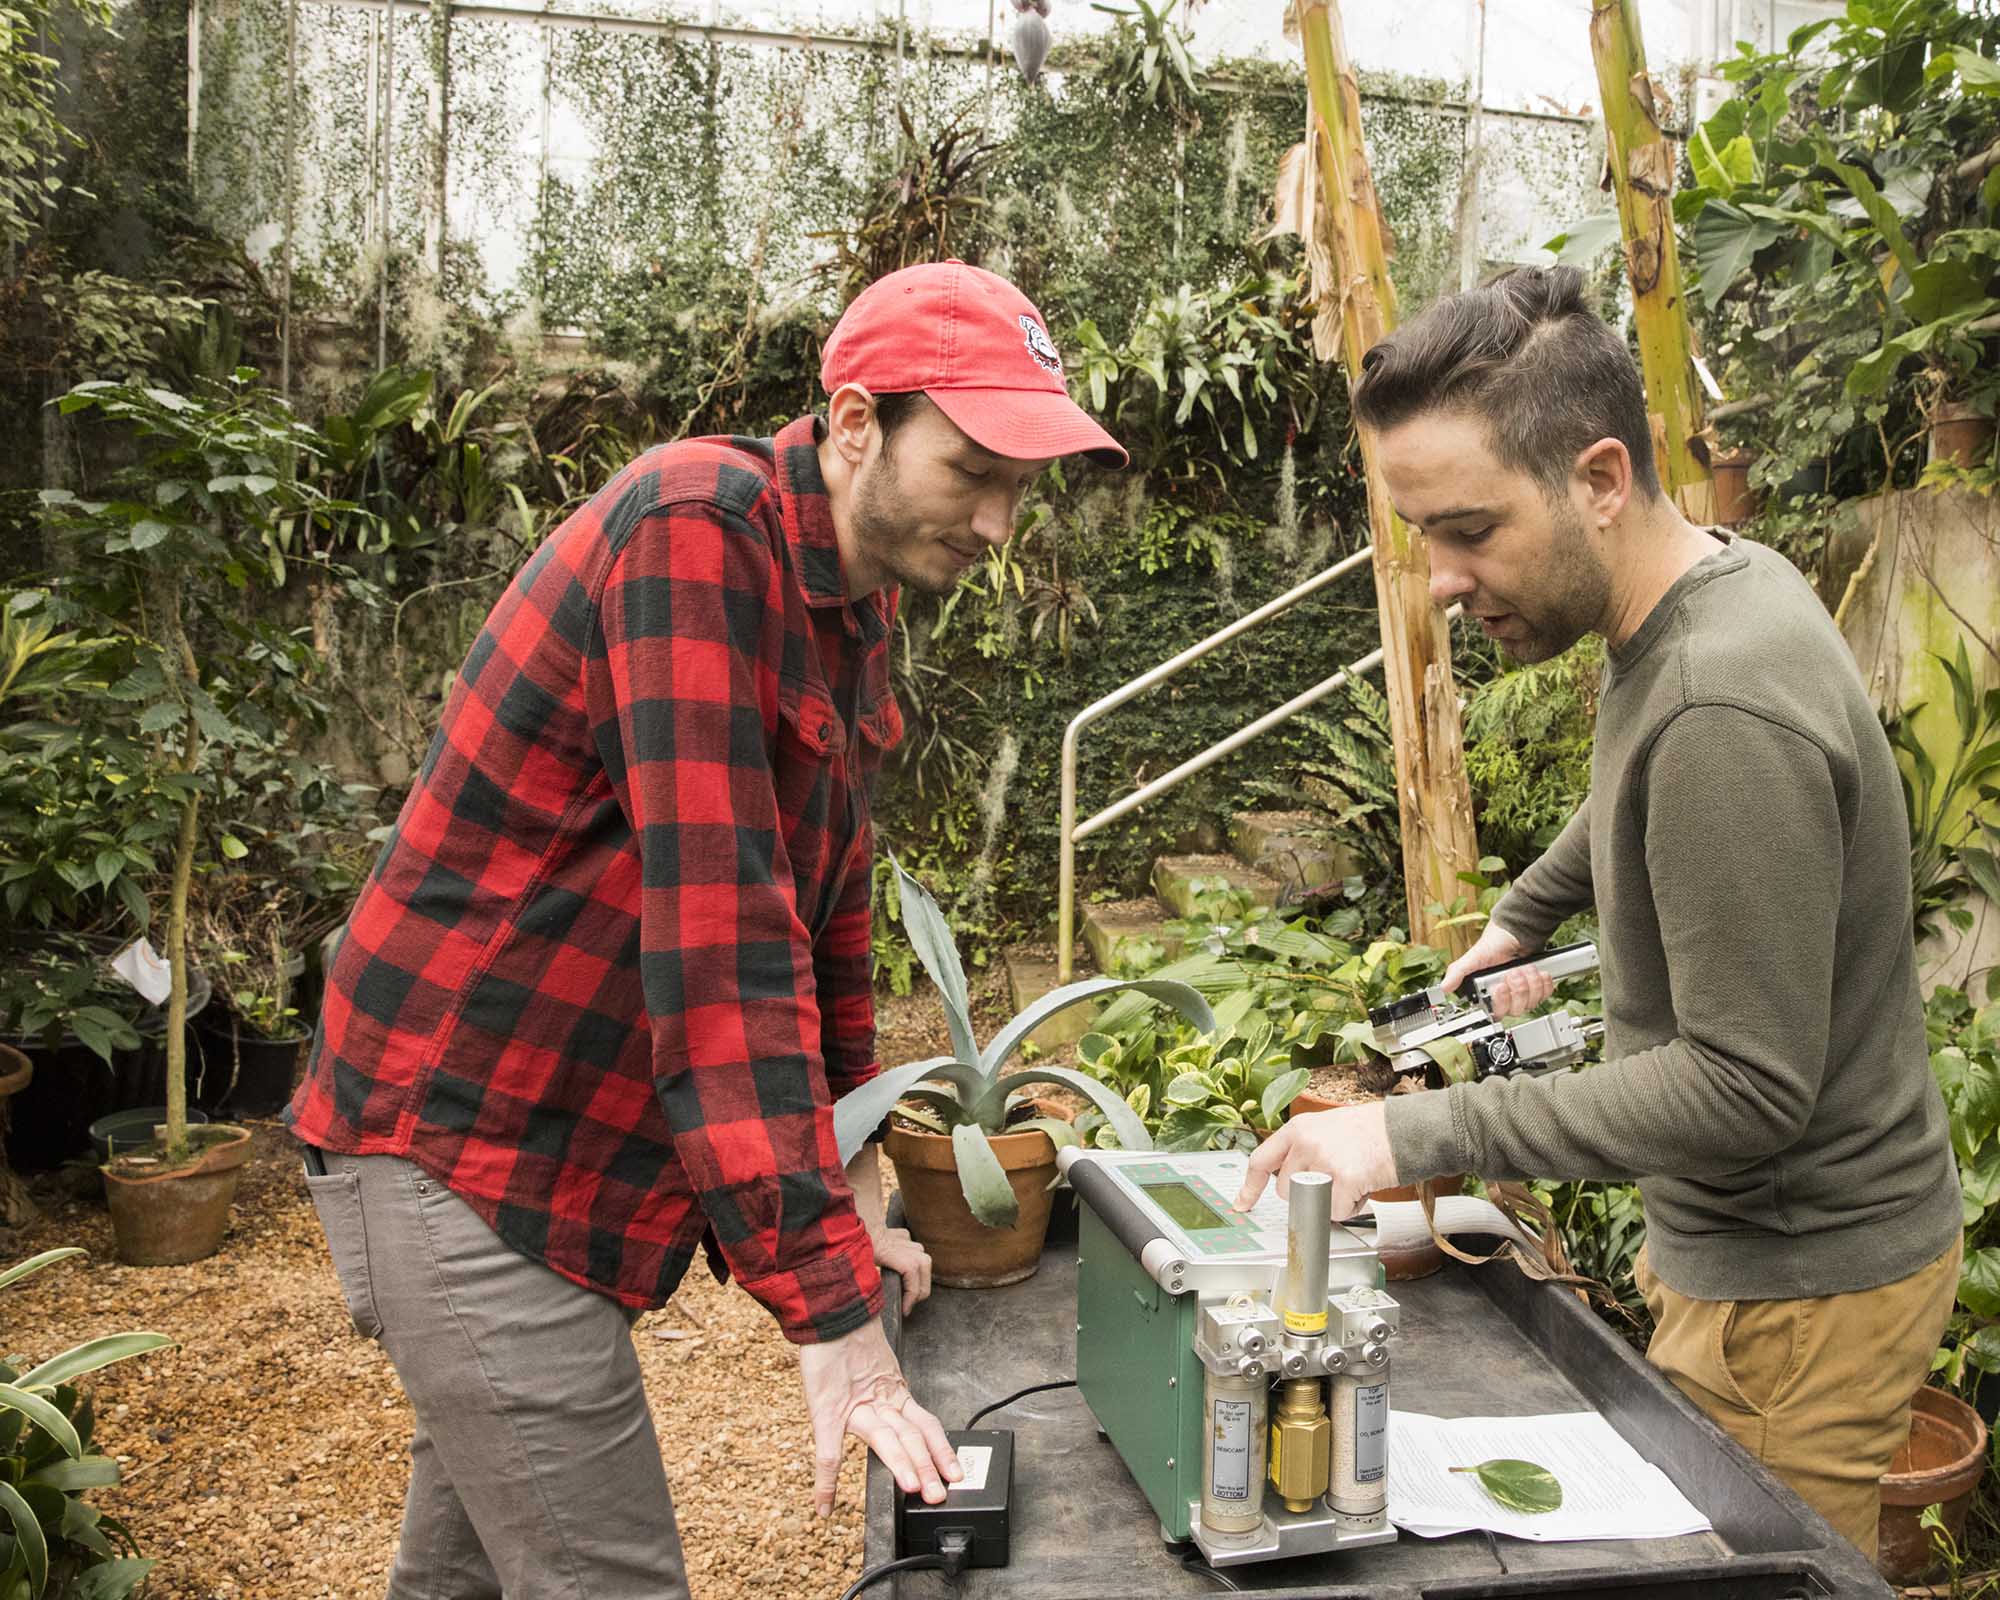 Graduate student Philip Bentz (left) and graduate student Rick Field (right) use a carbon dioxide sensor on a plant in the horticulture greenhouses. Bentz enrolled to UGA in the Integrated Plant Sciences program in 2019. (photo by Dorothy Kozlowski, taken prior to March 2020)